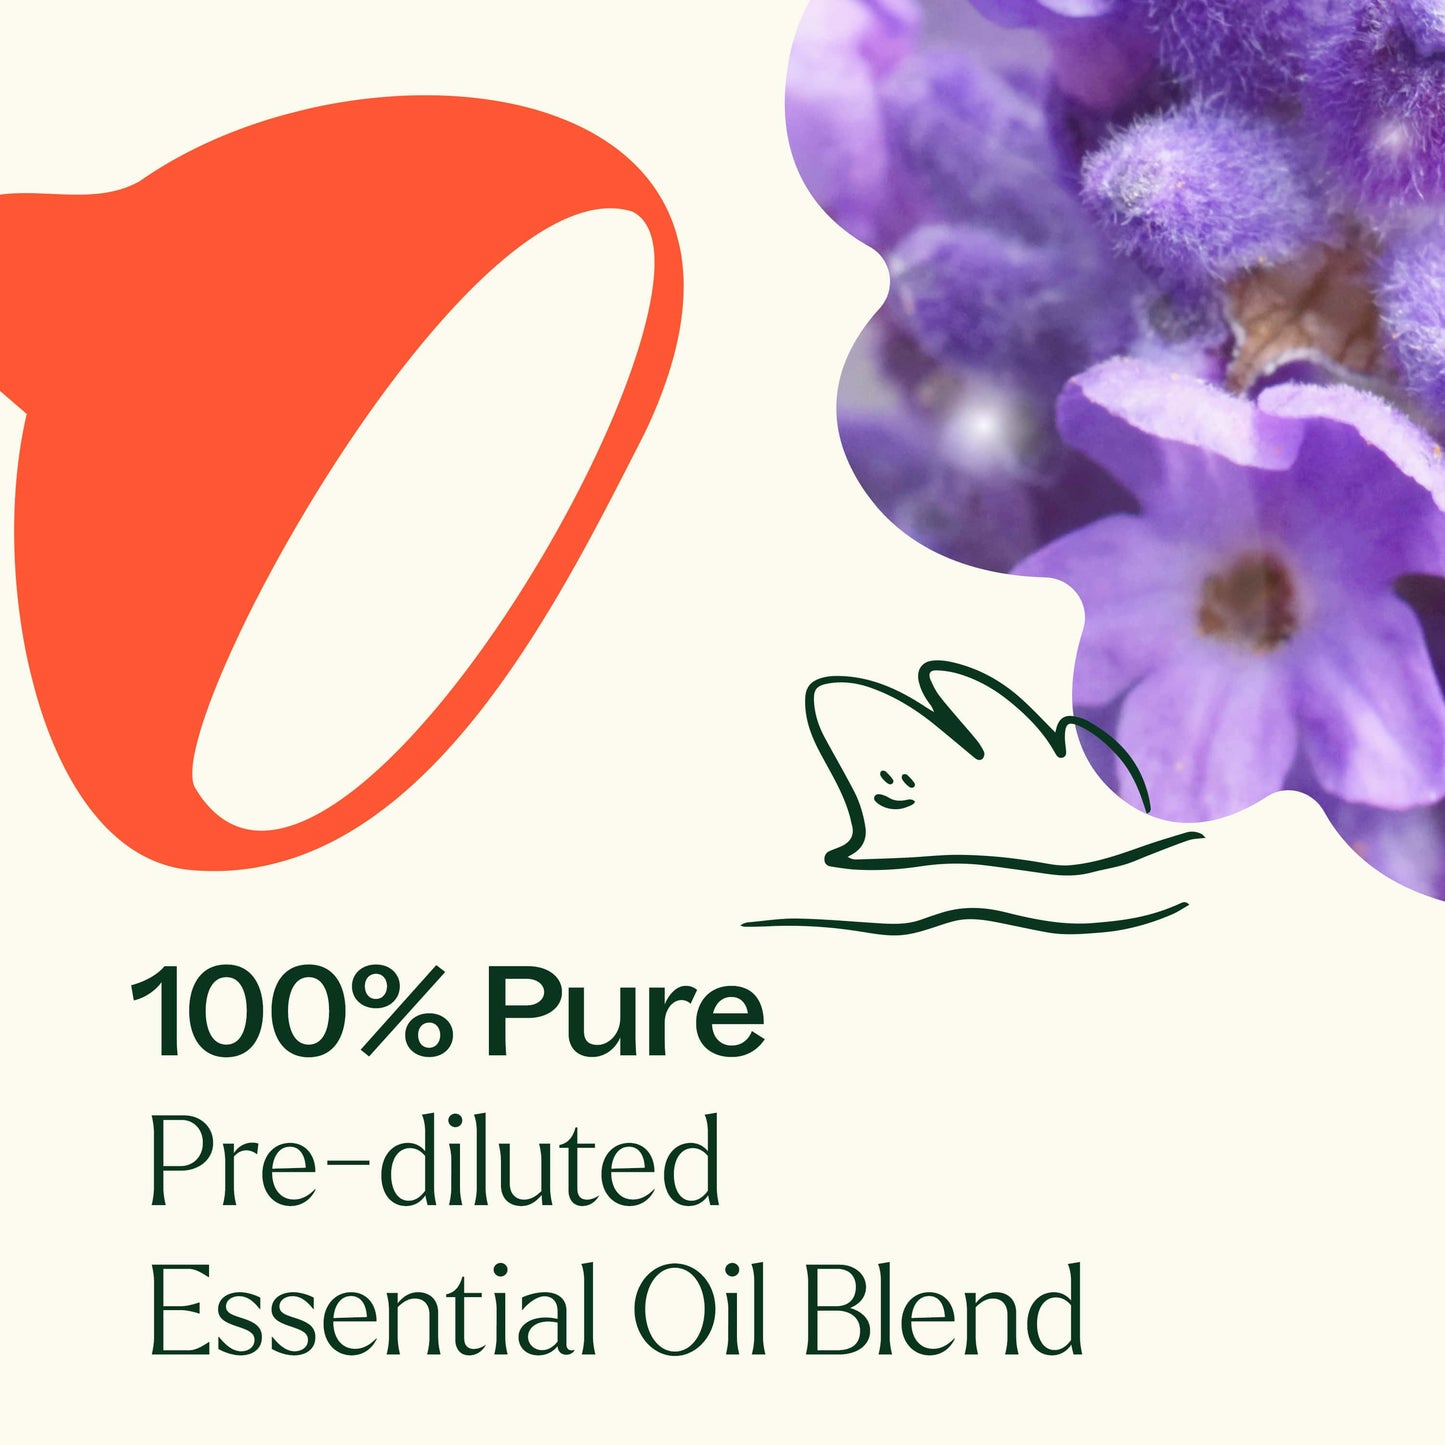 Sensual Essential Oil Blend Pre-Diluted Roll-On is 100% pure